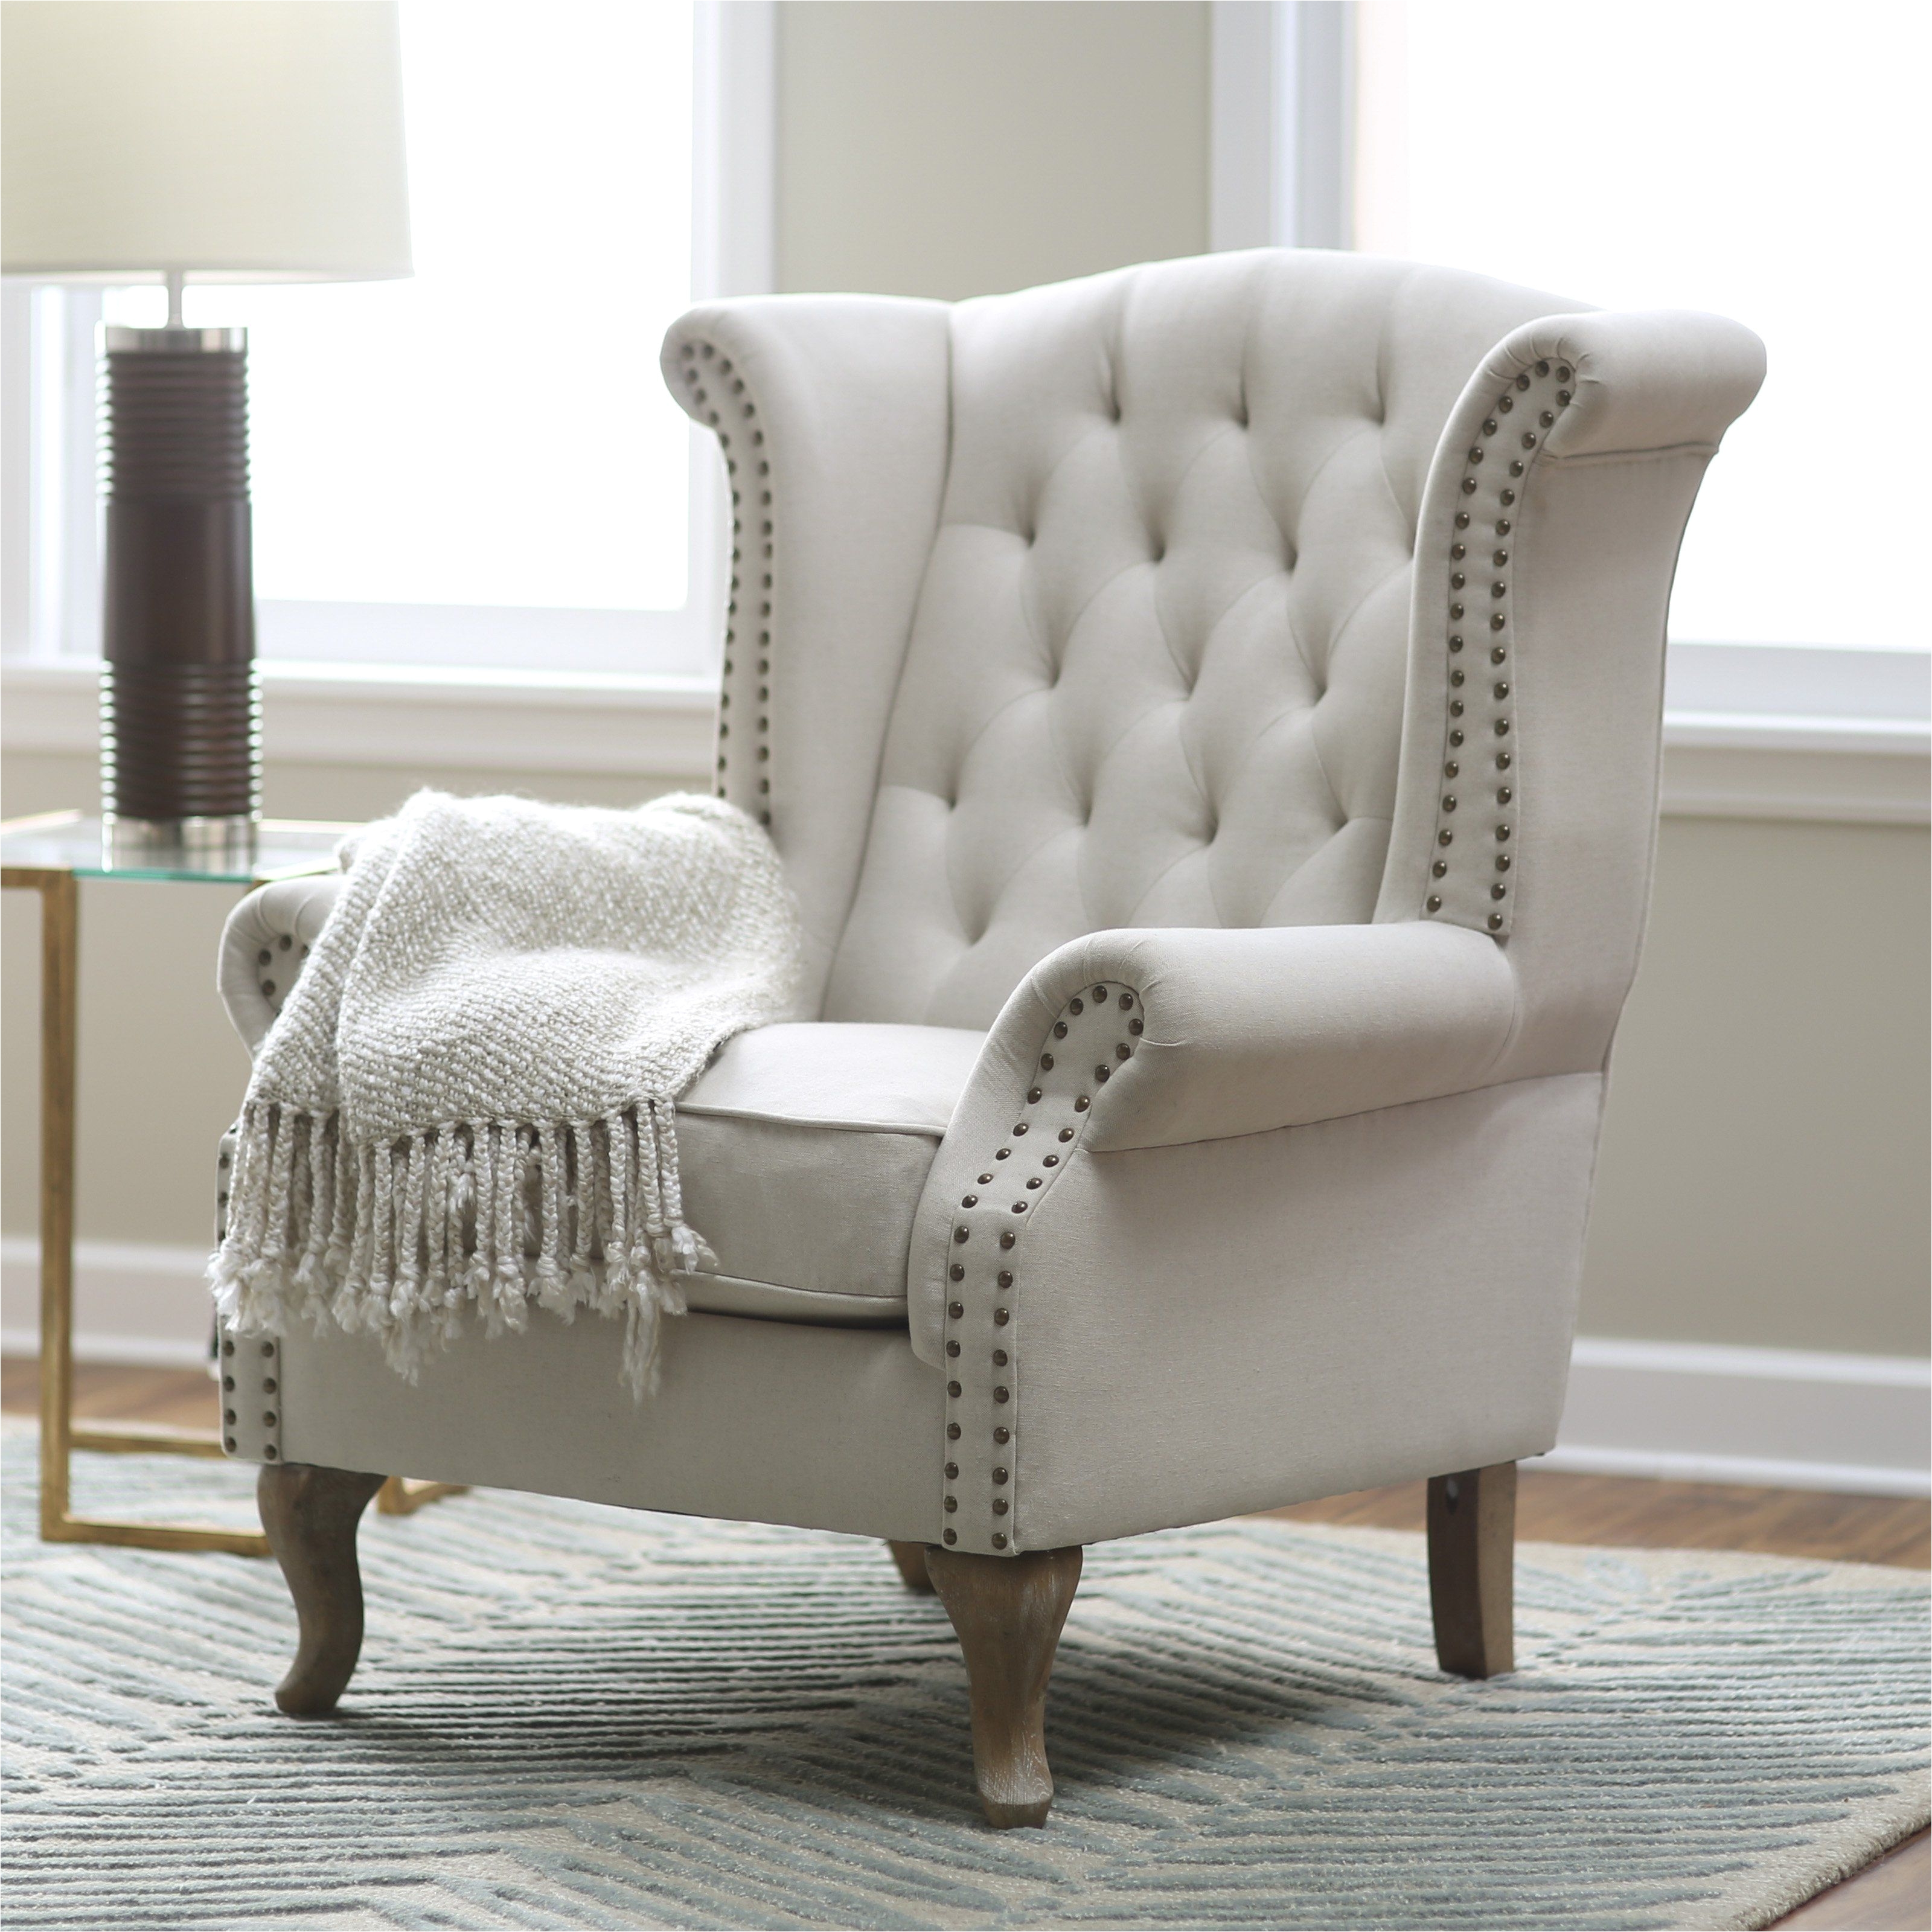 belham living tatum tufted arm chair with nailheads accent